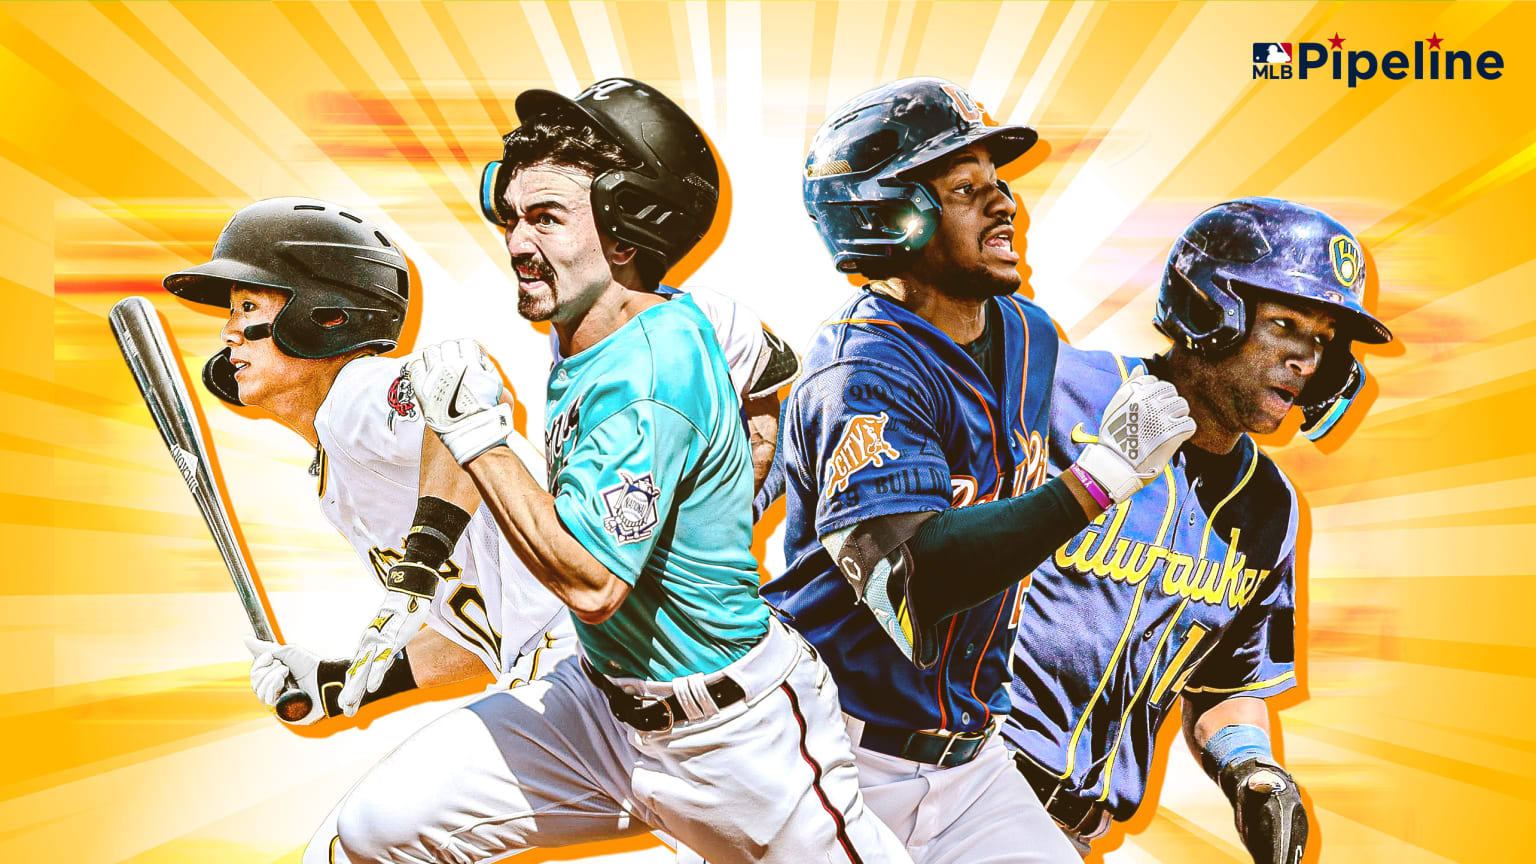 A photo illustration of four prospects running, with a yellow starburst behind them